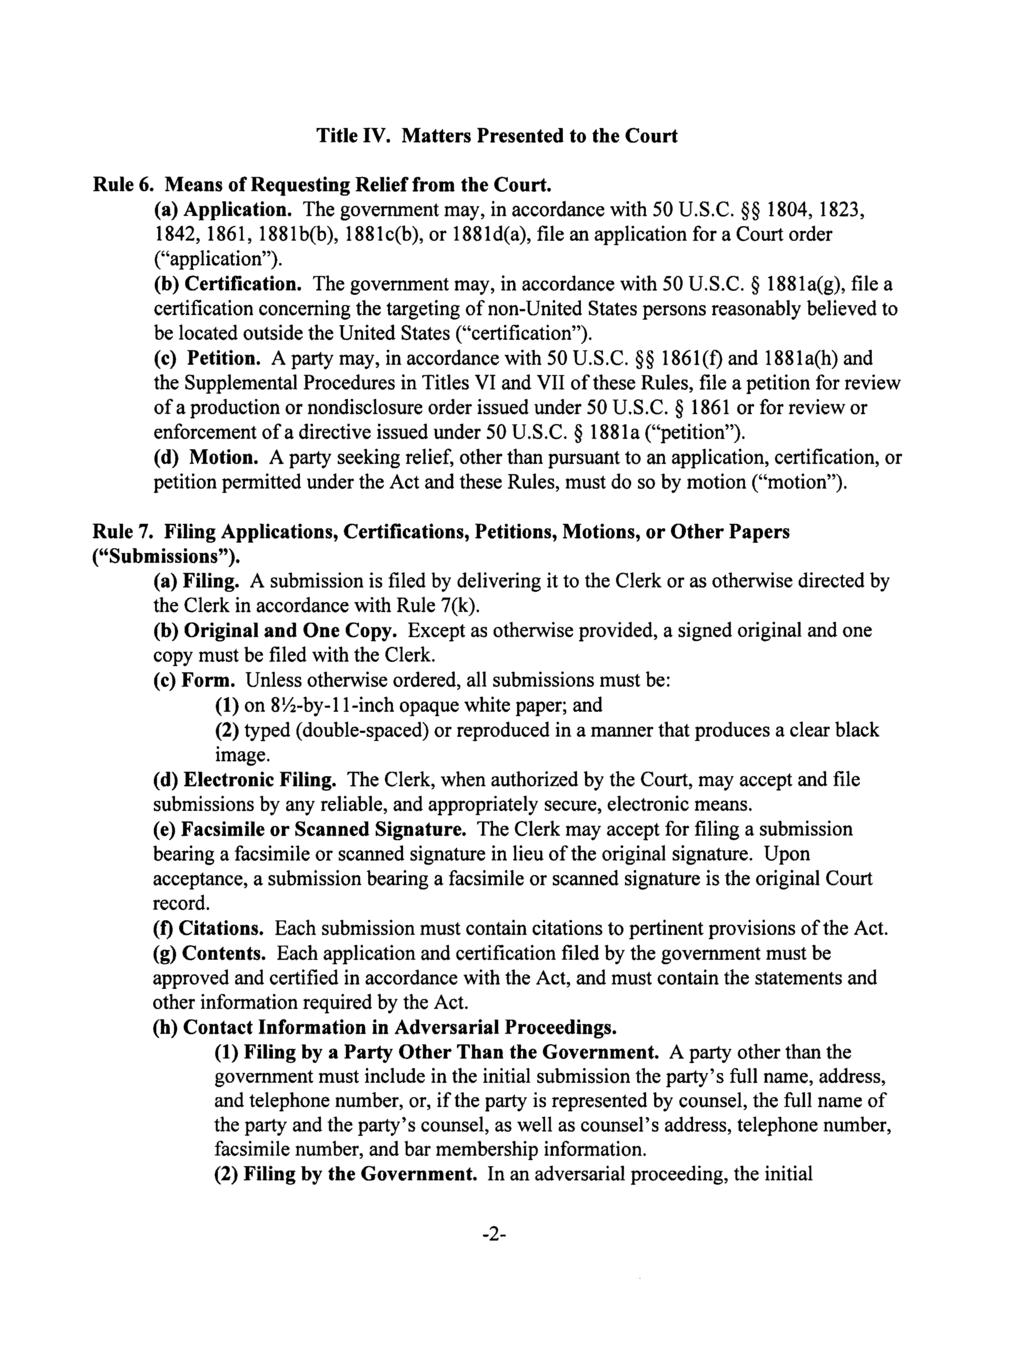 Title IV. Matters Presented to the Court Rule 6. Means of Requesting Relief from the Court. (a) Application. The government may, in accordance with 50 U.S.C. 1804, 1823, 1842, 1861, 1881 b(b), 188lc(b), or 188ld(a), file an application for a Court order ("application").